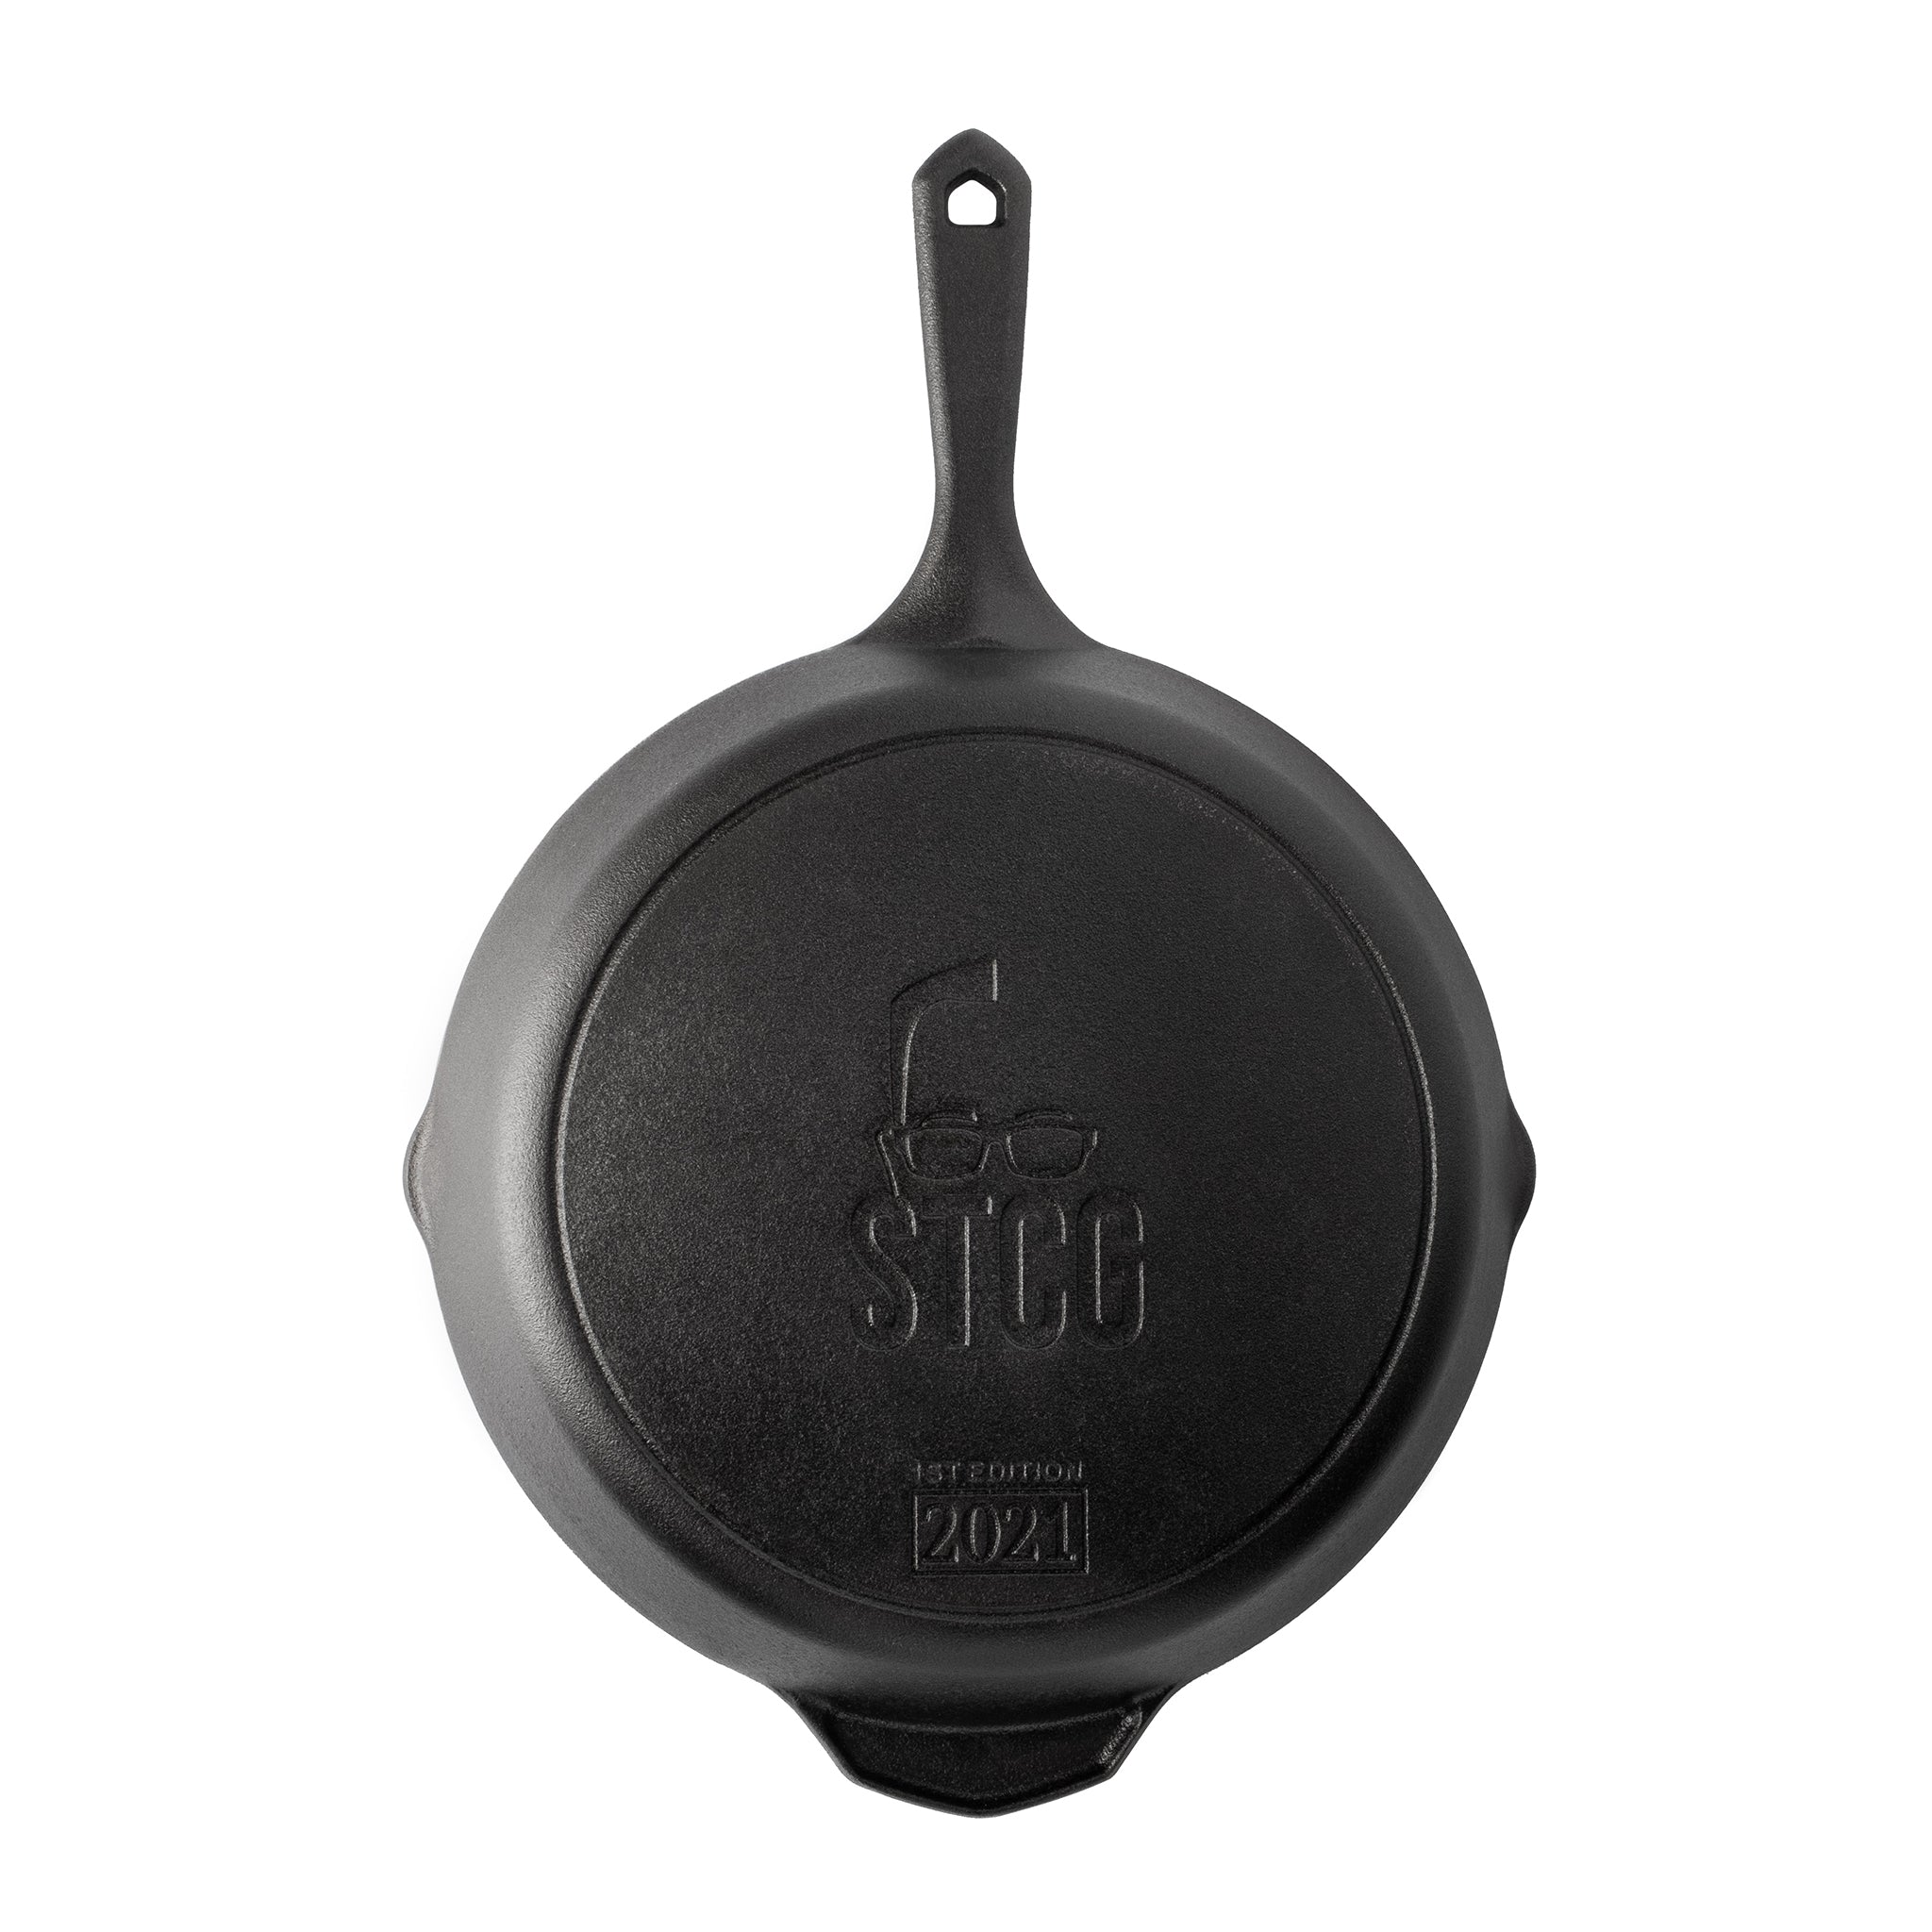 Cast Iron Skillet with Tempered Glass Lid, 12-Inch Double Handled